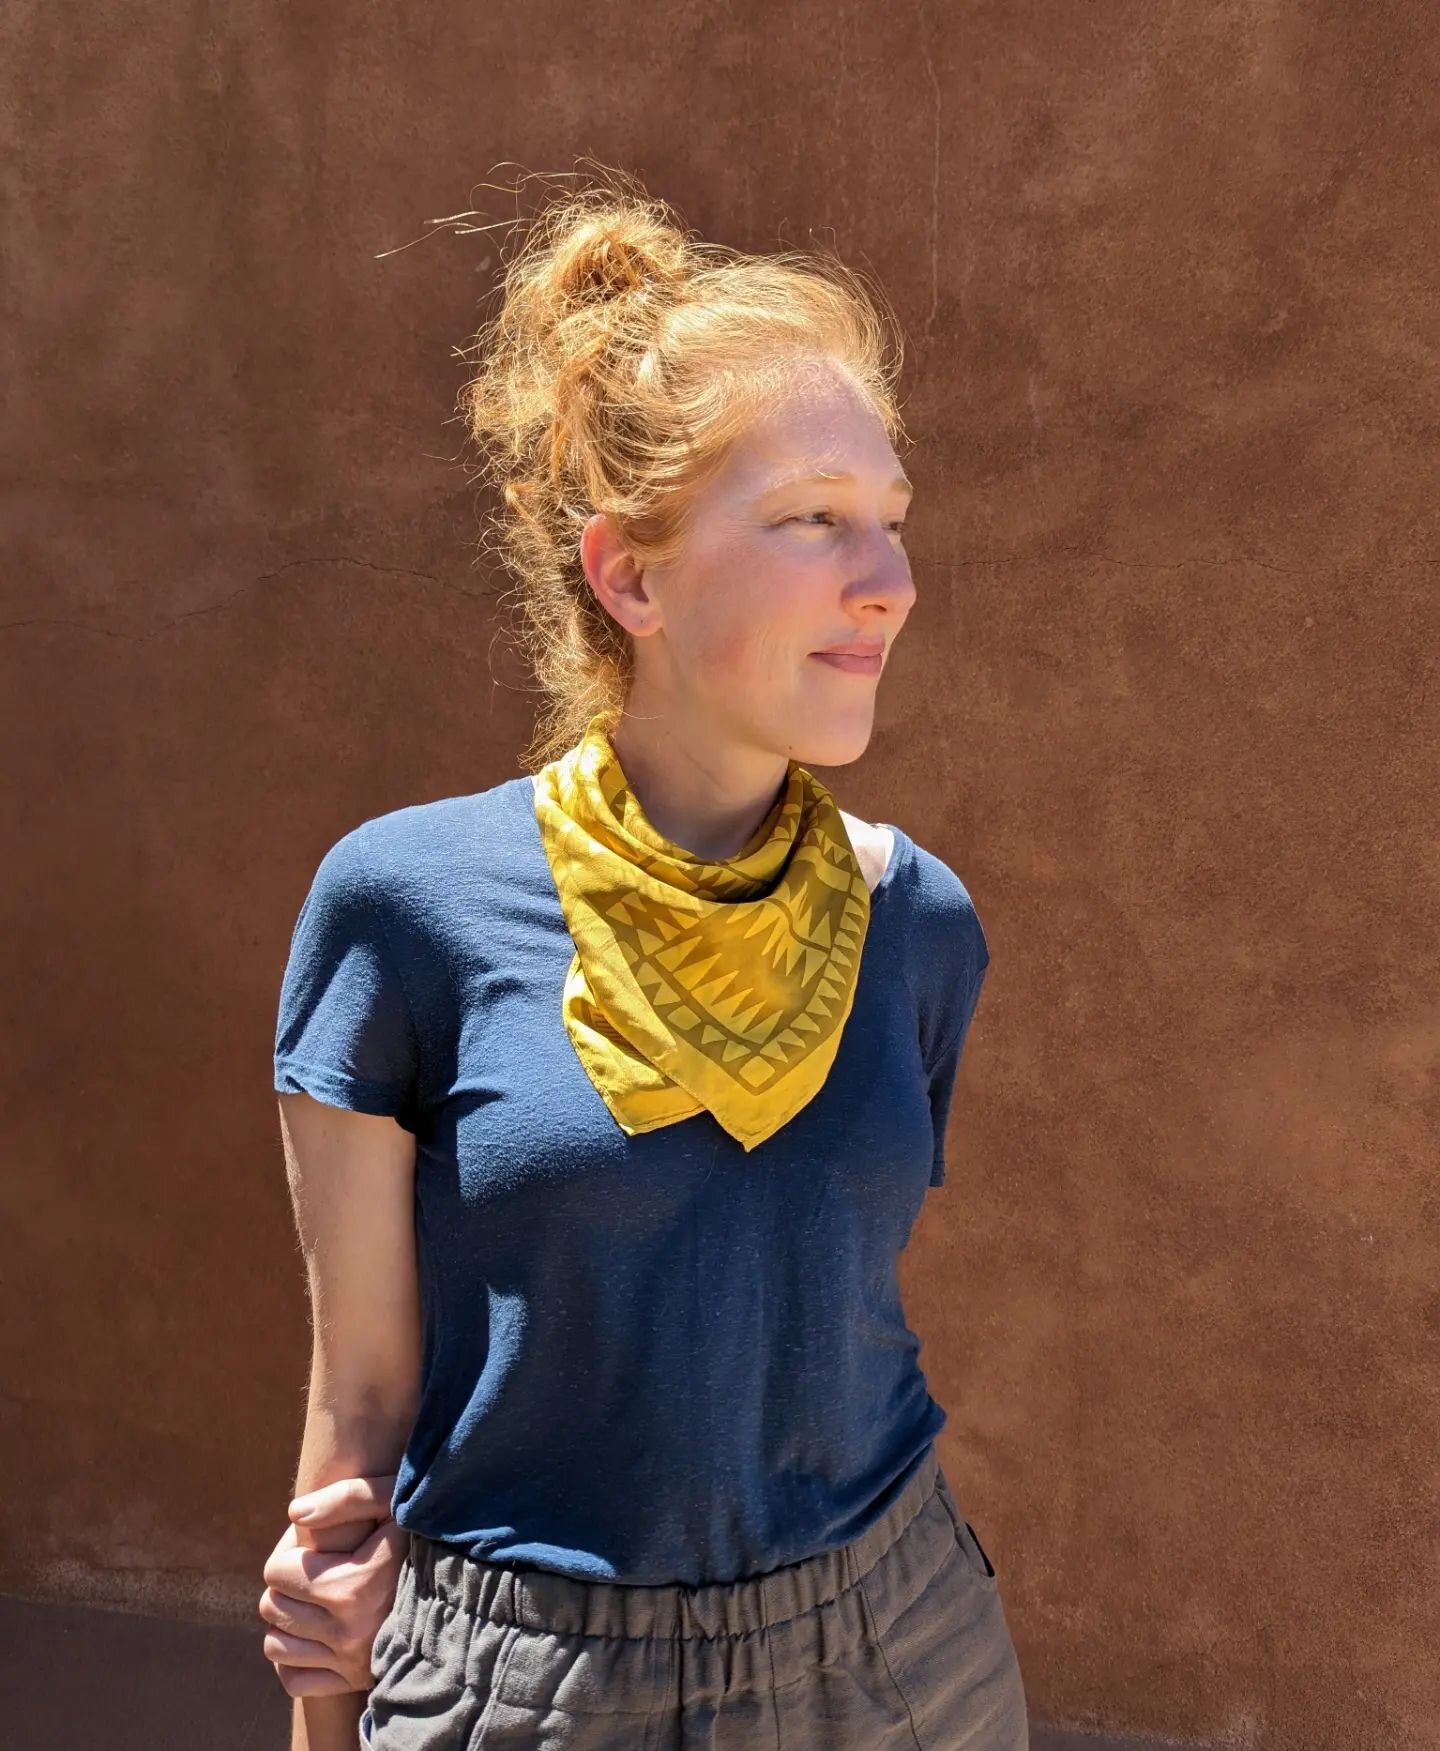 Grey skies here today mean we&rsquo;re wearing our most favorite silk-as-sunshine bandana and thinking back to the bright skies of Santa Fe earlier this spring. There are only two of these Gold Medal Bandanas left on our site, so don&rsquo;t wait if 